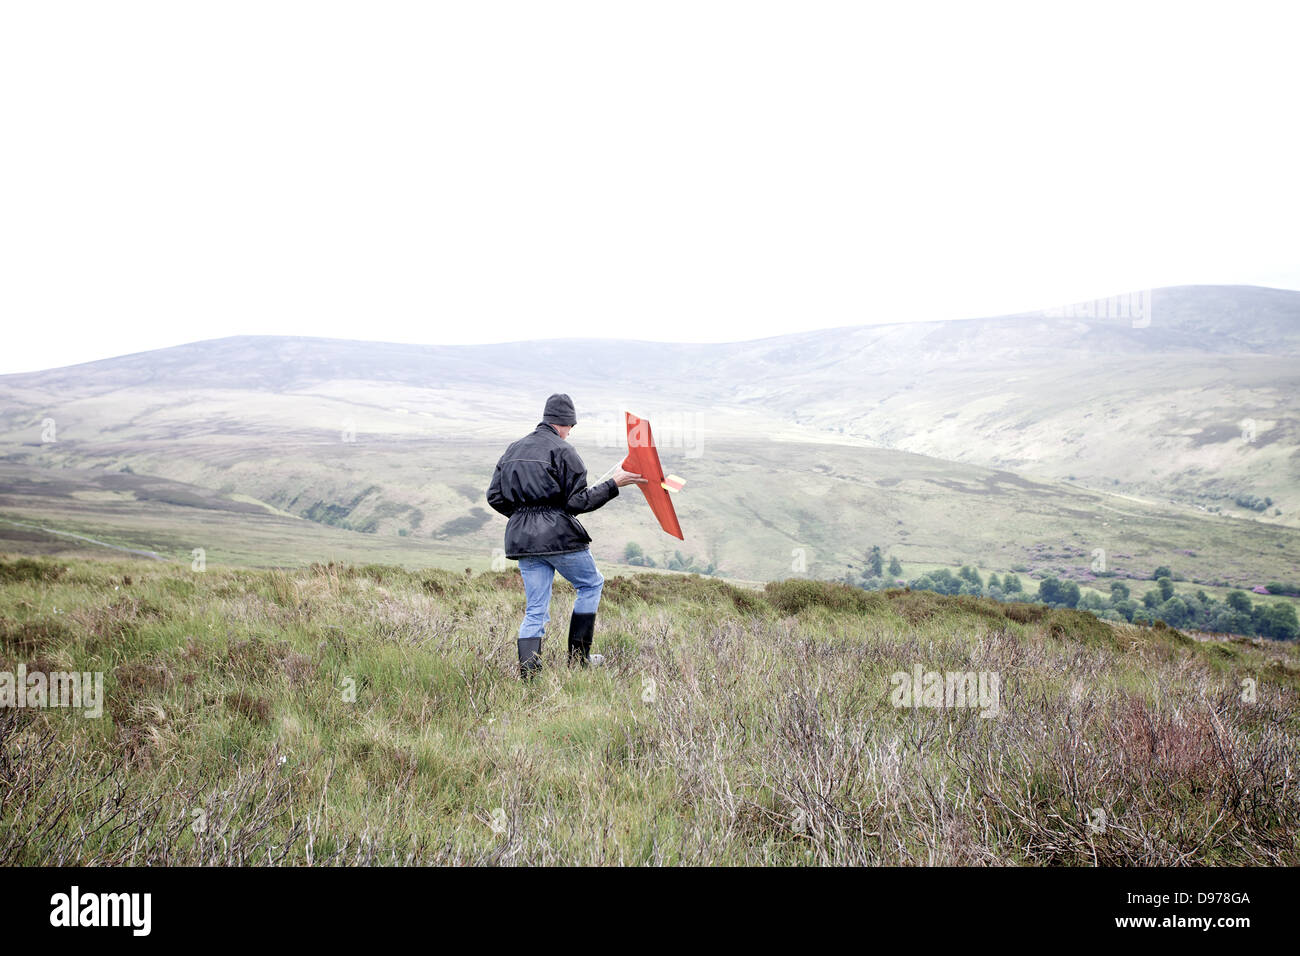 A man with a remote control airplane in walking in mountainous landscape Stock Photo